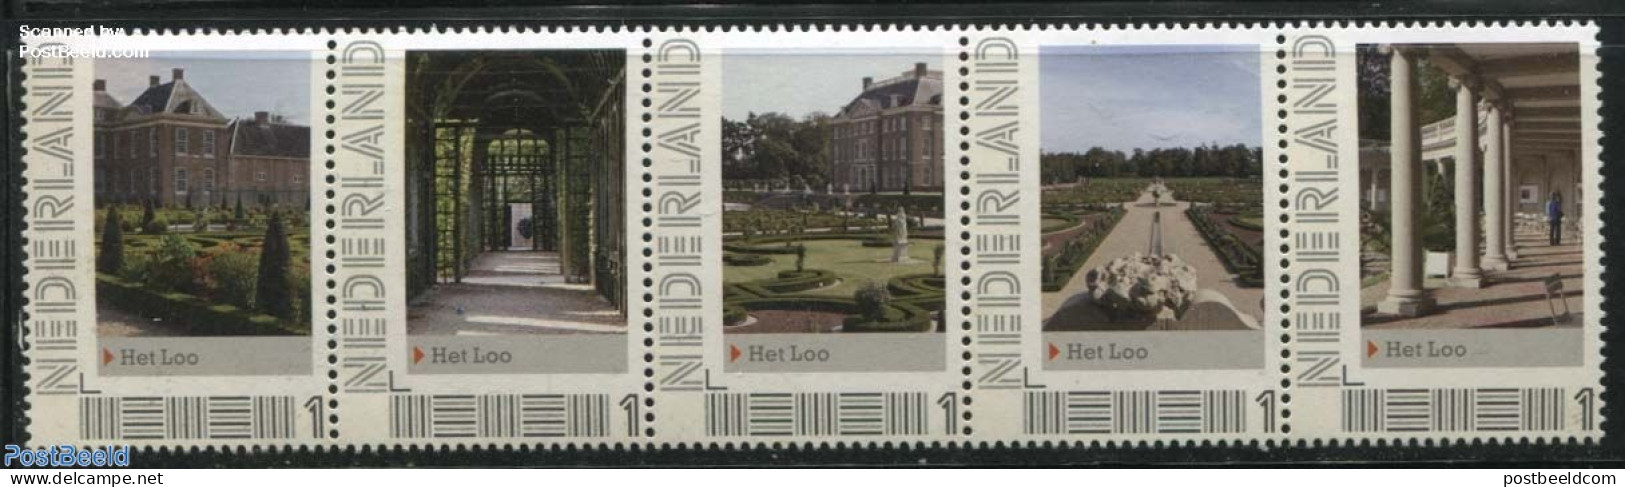 Netherlands - Personal Stamps TNT/PNL 2012 Het Loo 5V [::::], Mint NH, Nature - Trees & Forests - Art - Castles & Fort.. - Rotary, Lions Club